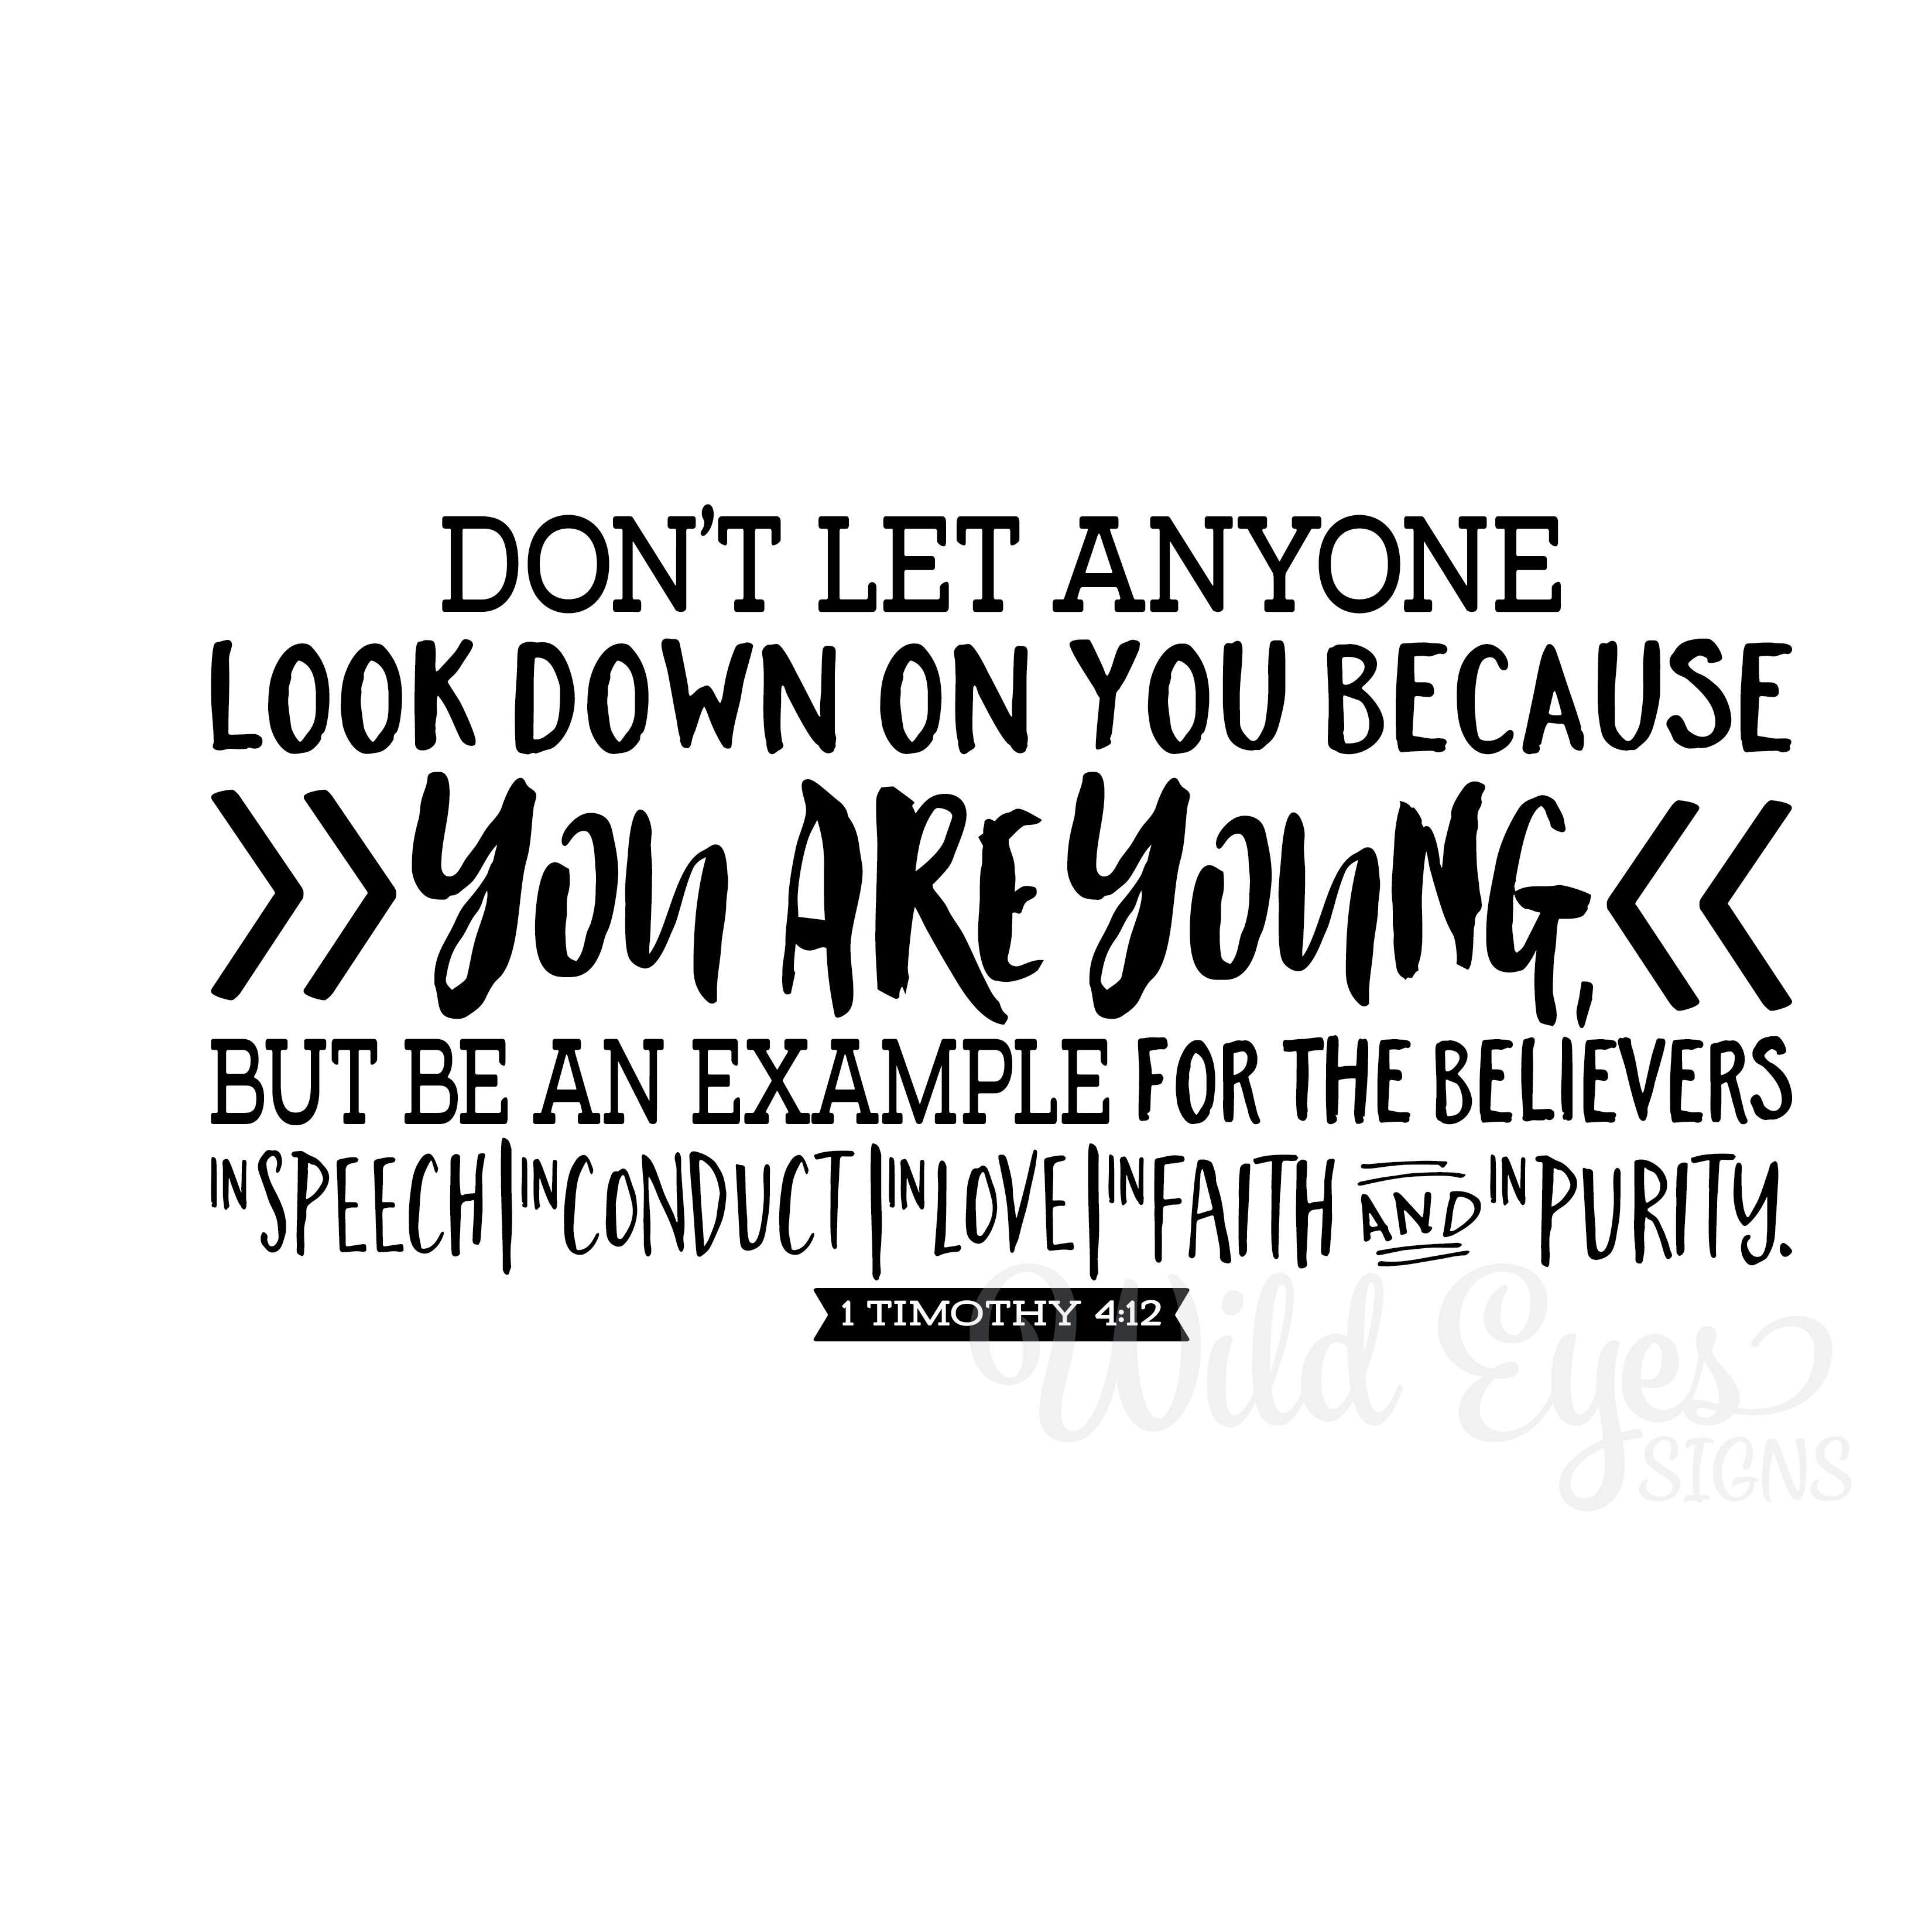 1 Timothy 412 Vinyl Wall Decal 7, Don't let anyone look